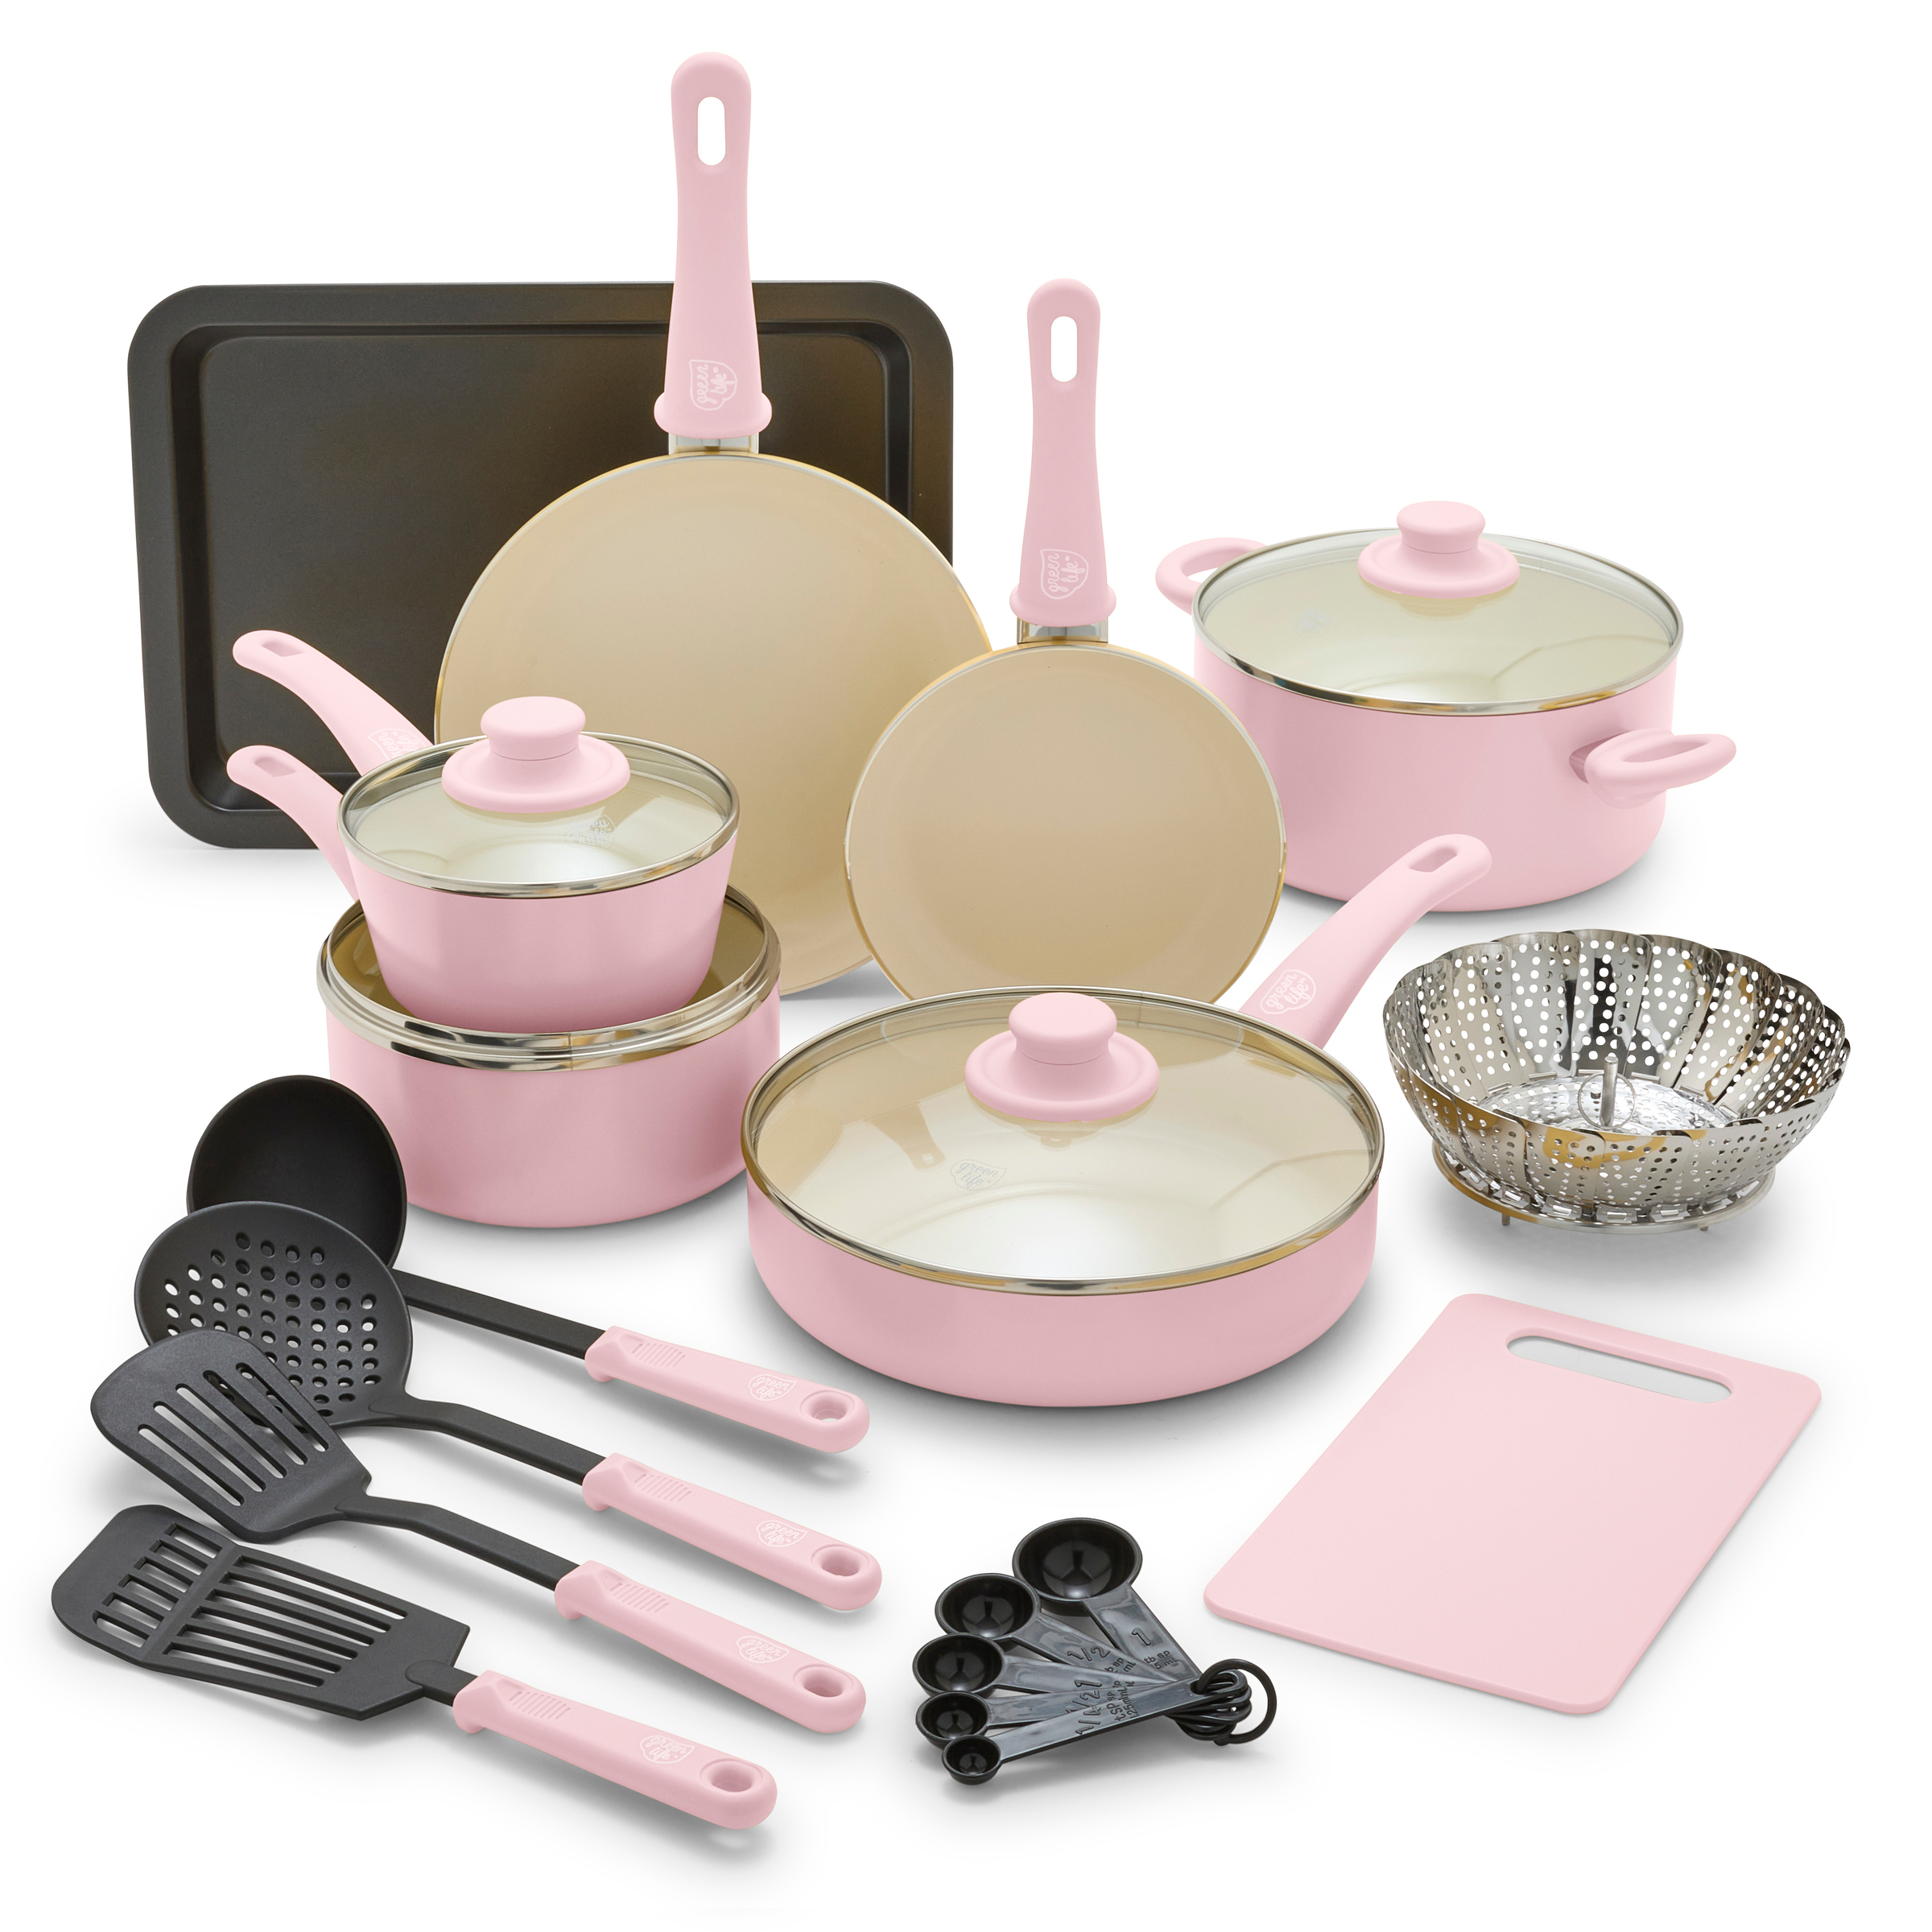 GreenLife 18-Piece Soft Grip Toxin-Free Healthy Ceramic Non-Stick Cookware Set, Pink, Dishwasher Safe - image 1 of 12